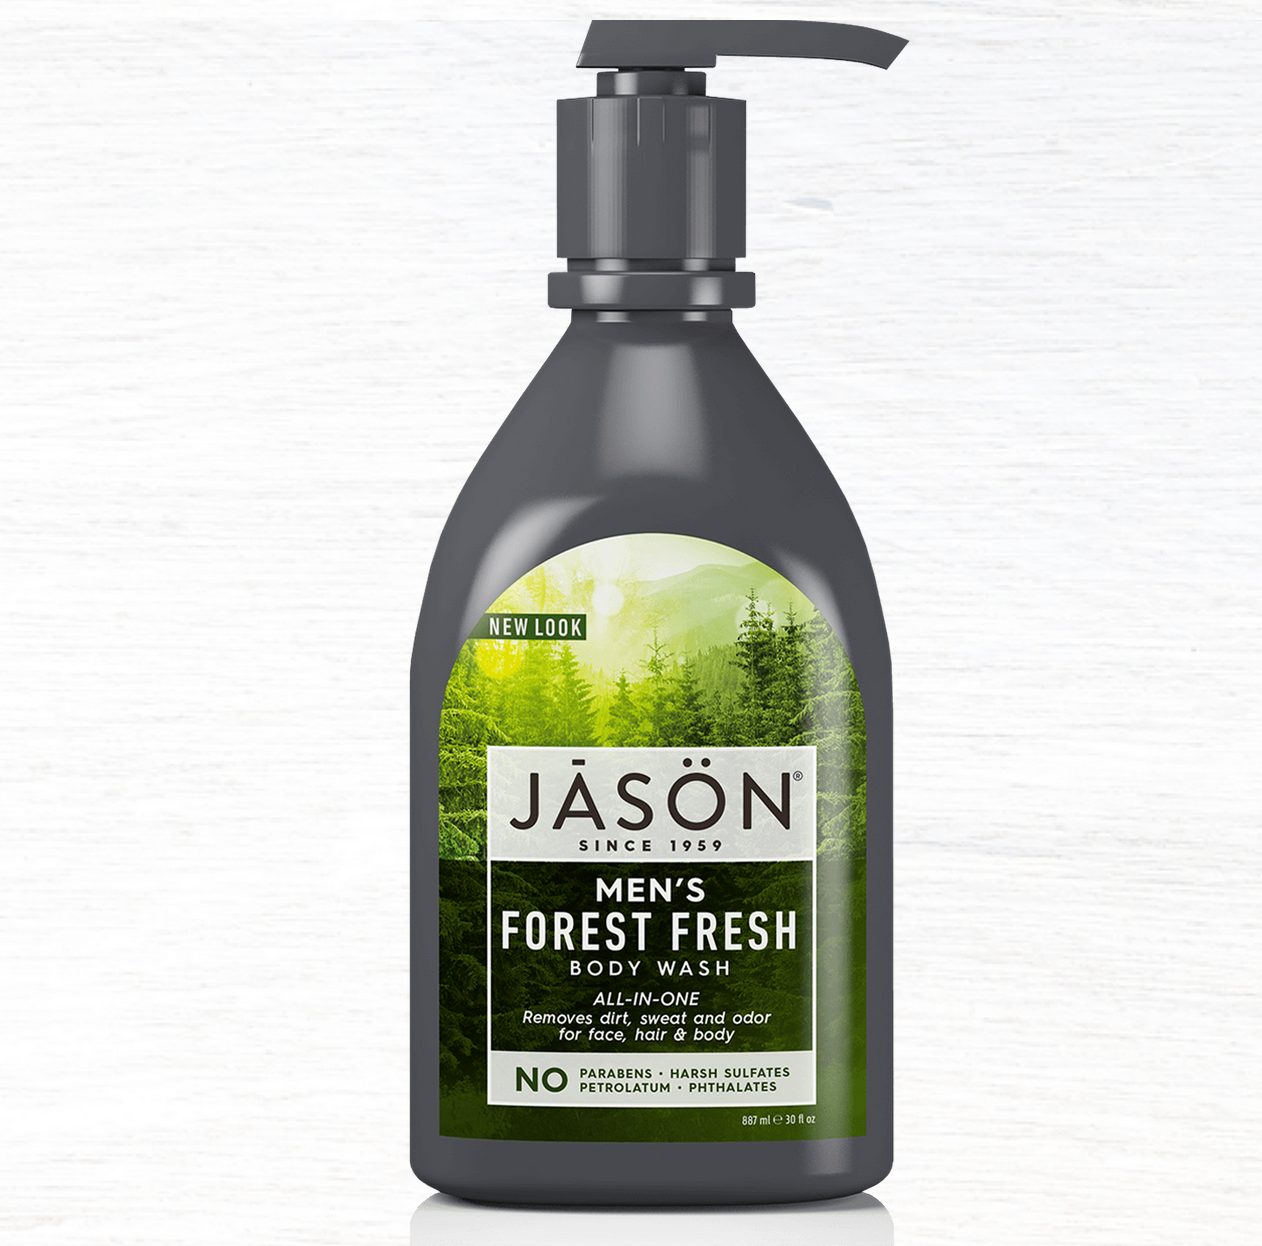 Men's All-In-One Forest Fresh Body Wash